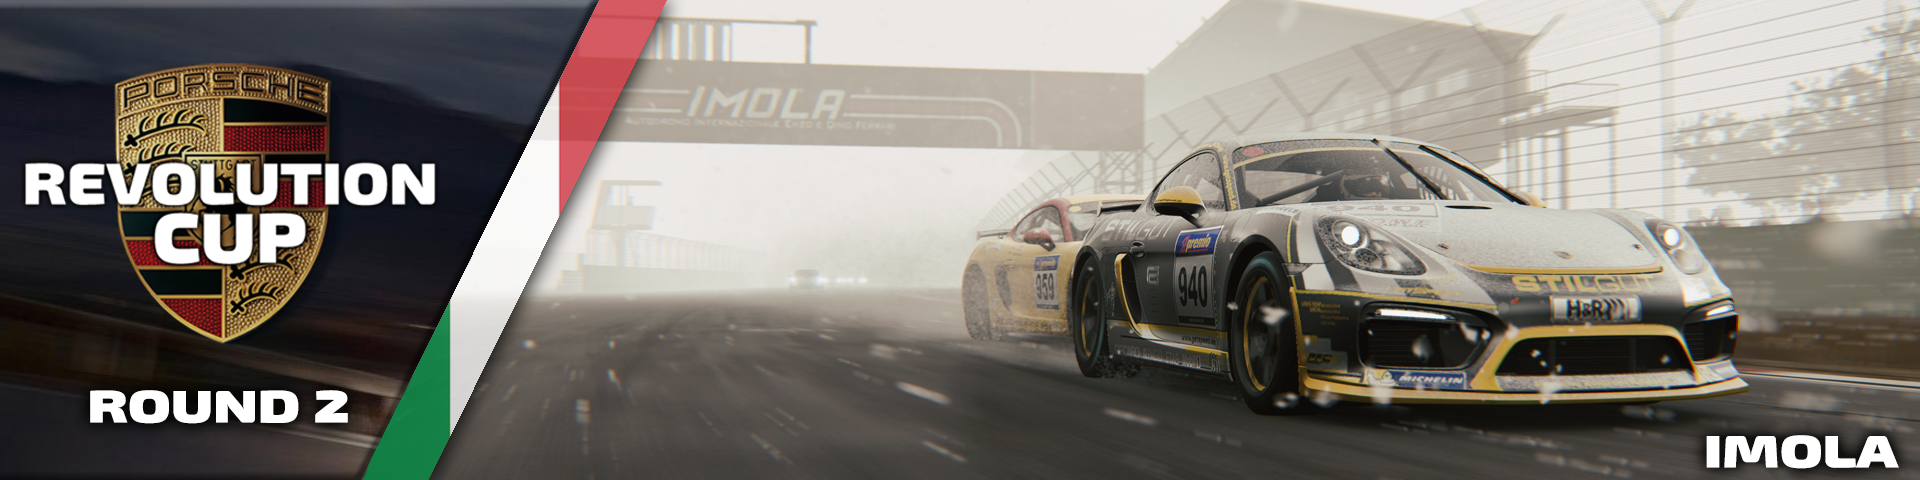 Round 2 - Imola Banner.png